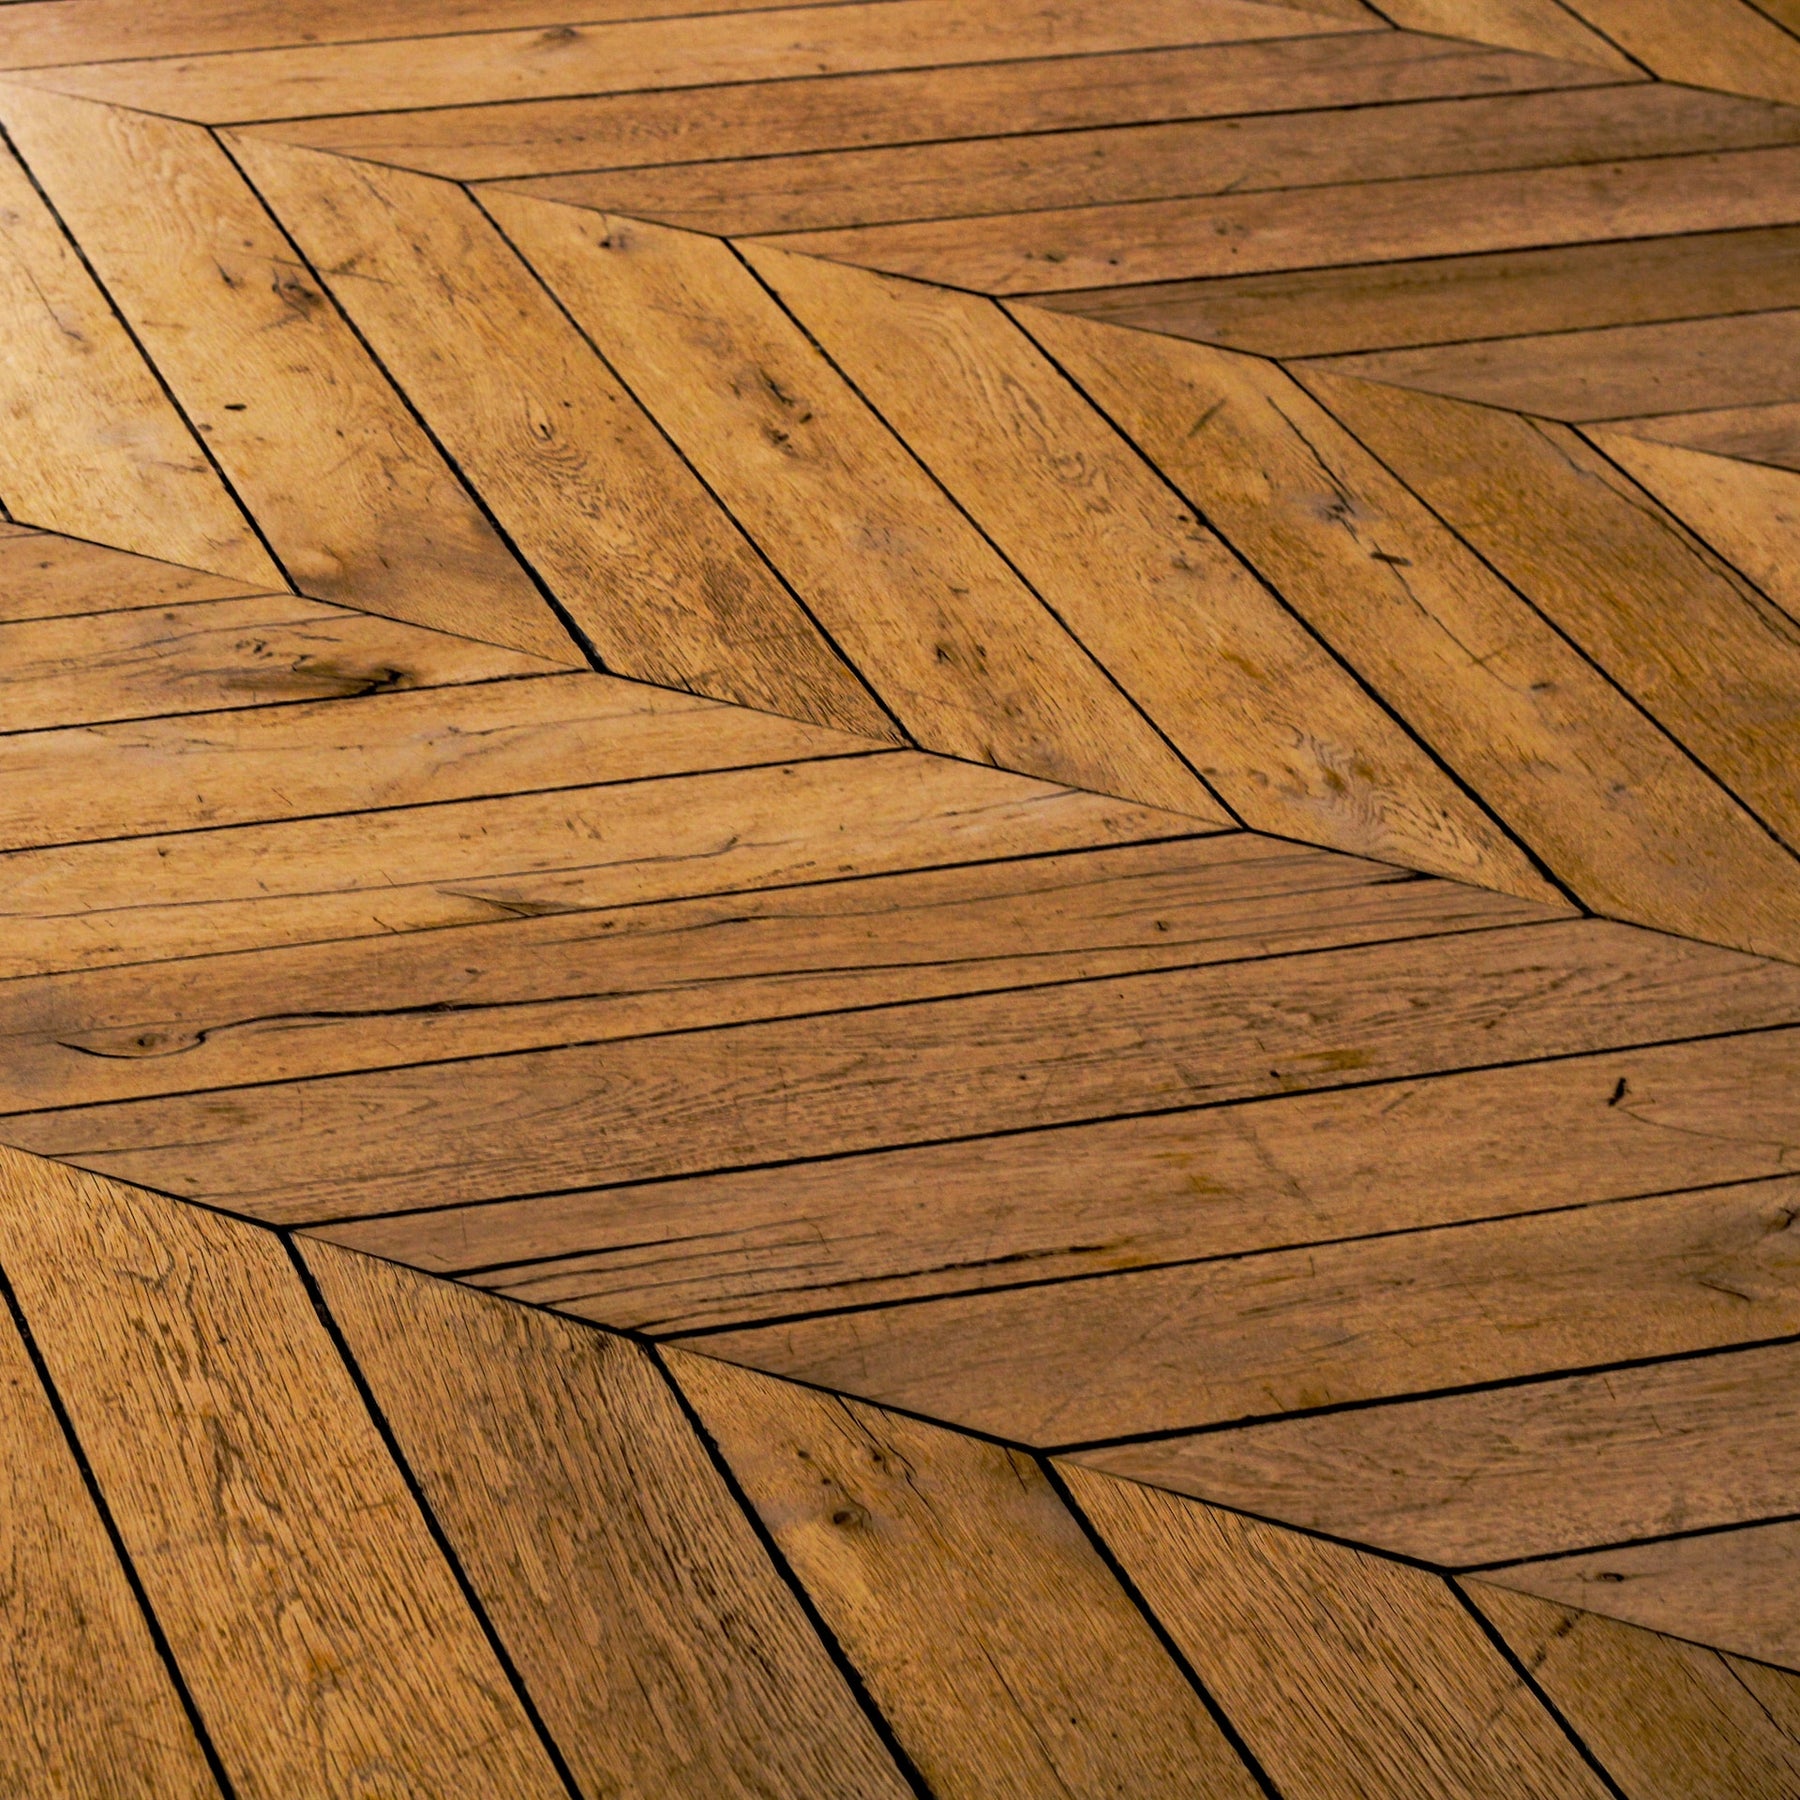 A Buyer's Guide: What to Look for in Hardwood Flooring